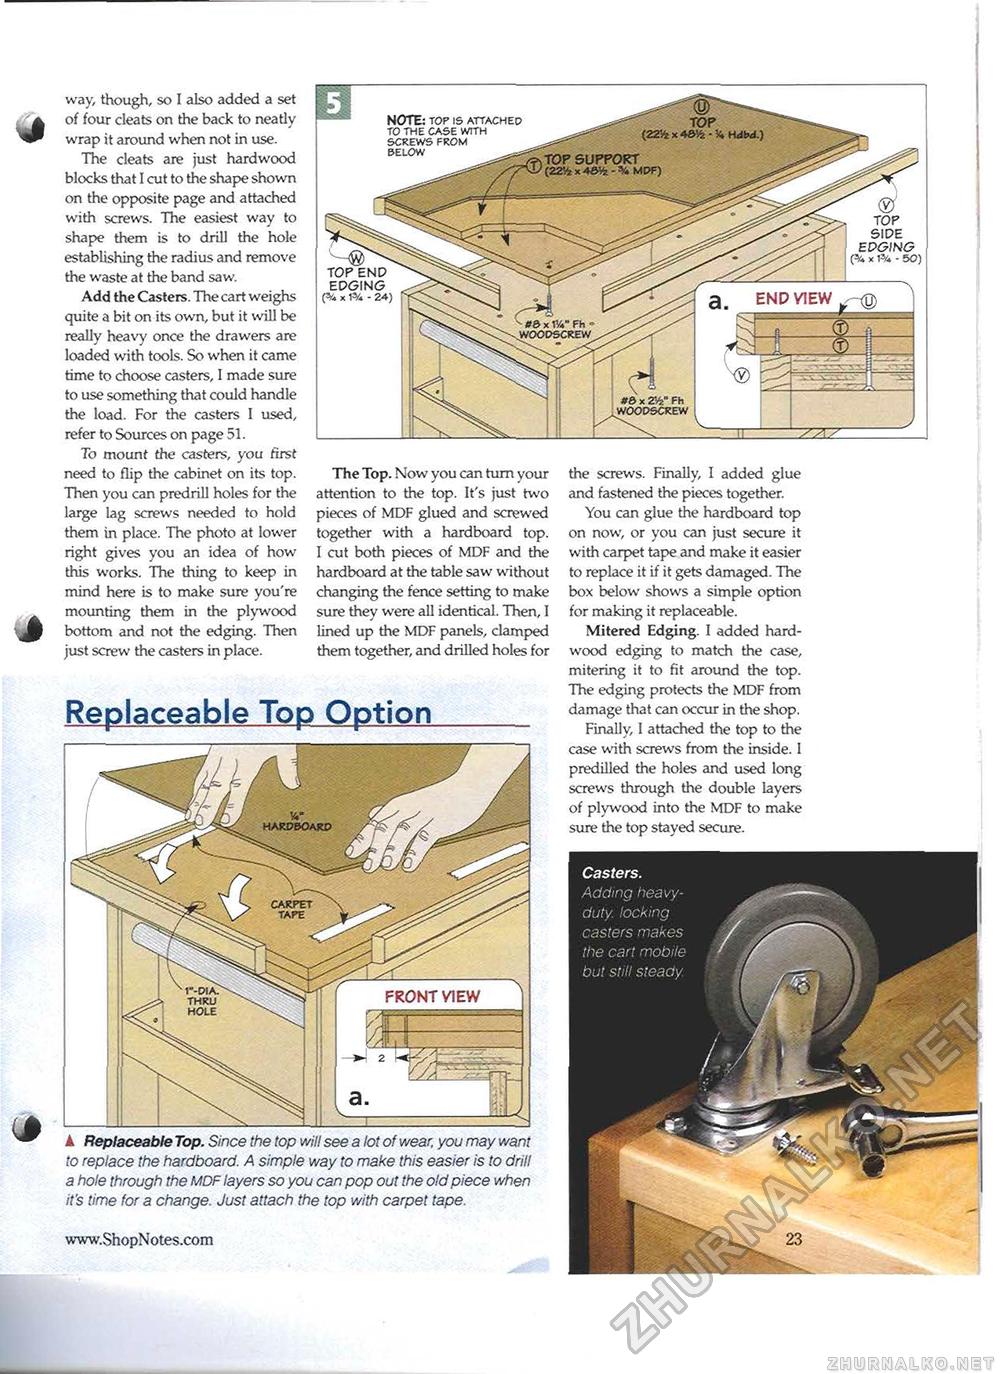 90 - Get the Most out of a Plunge Router,  23